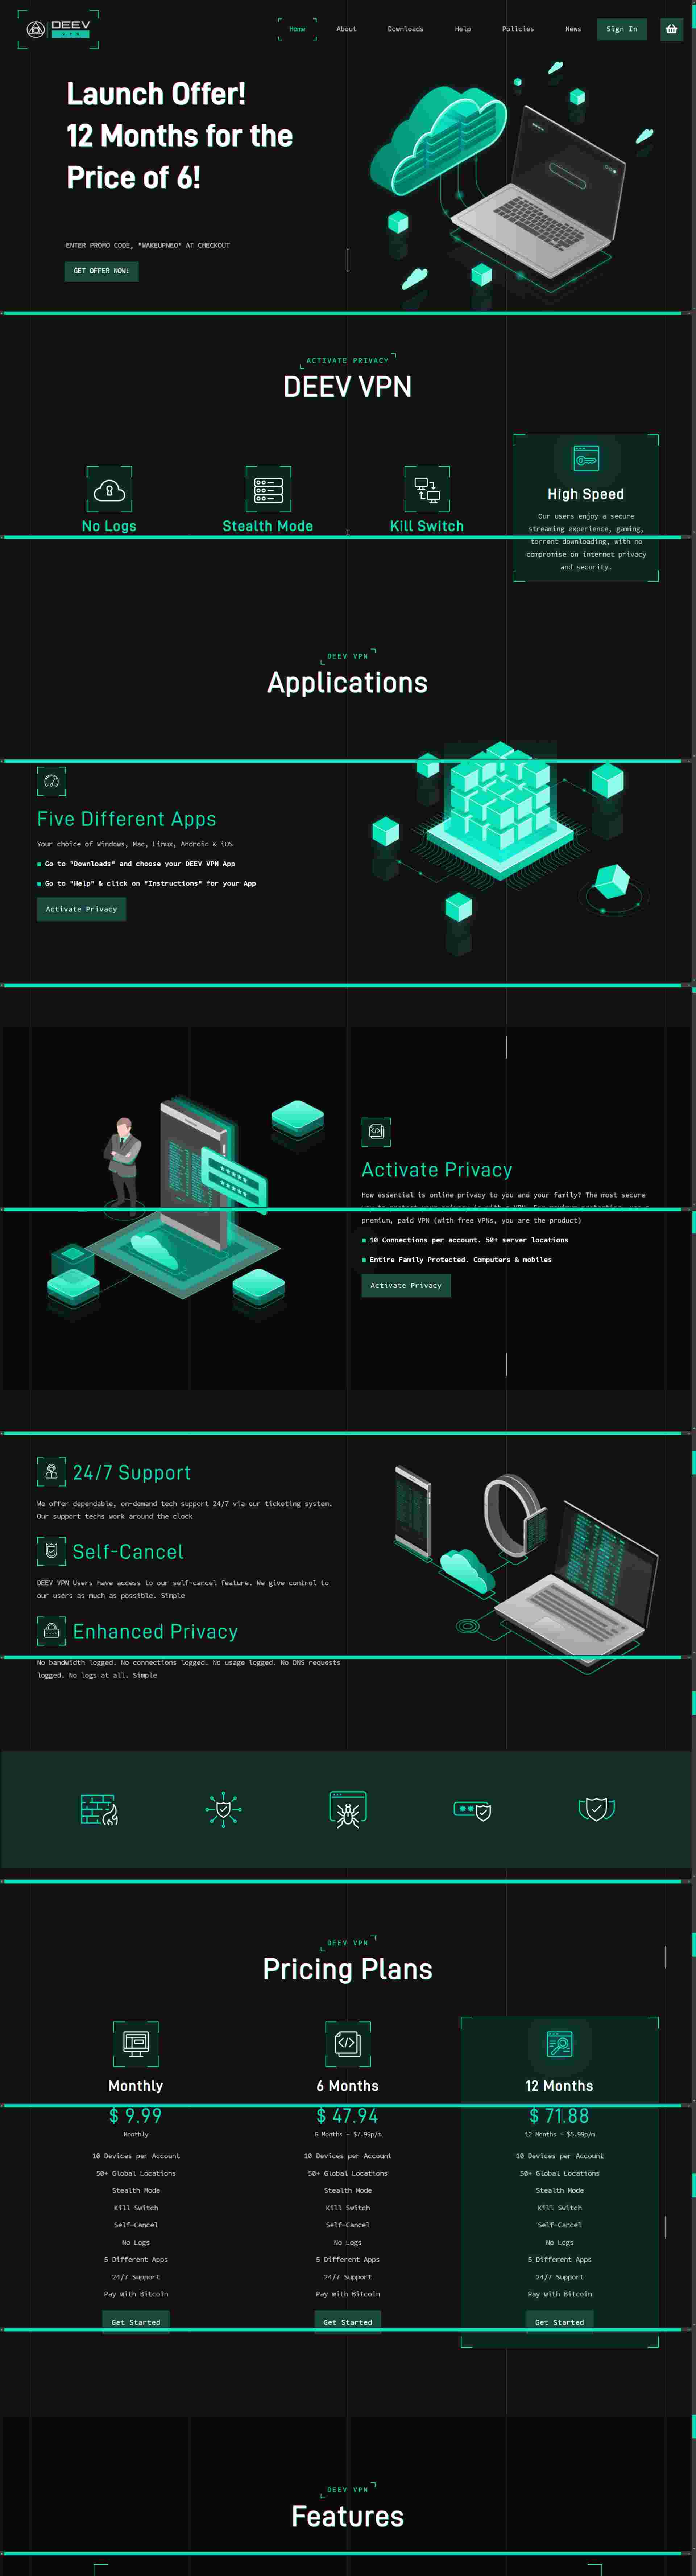 Deev Vpn Website is Developed By ElySpace featuring a modern interface with navigation menus, security features highlights, and a prominent connect button